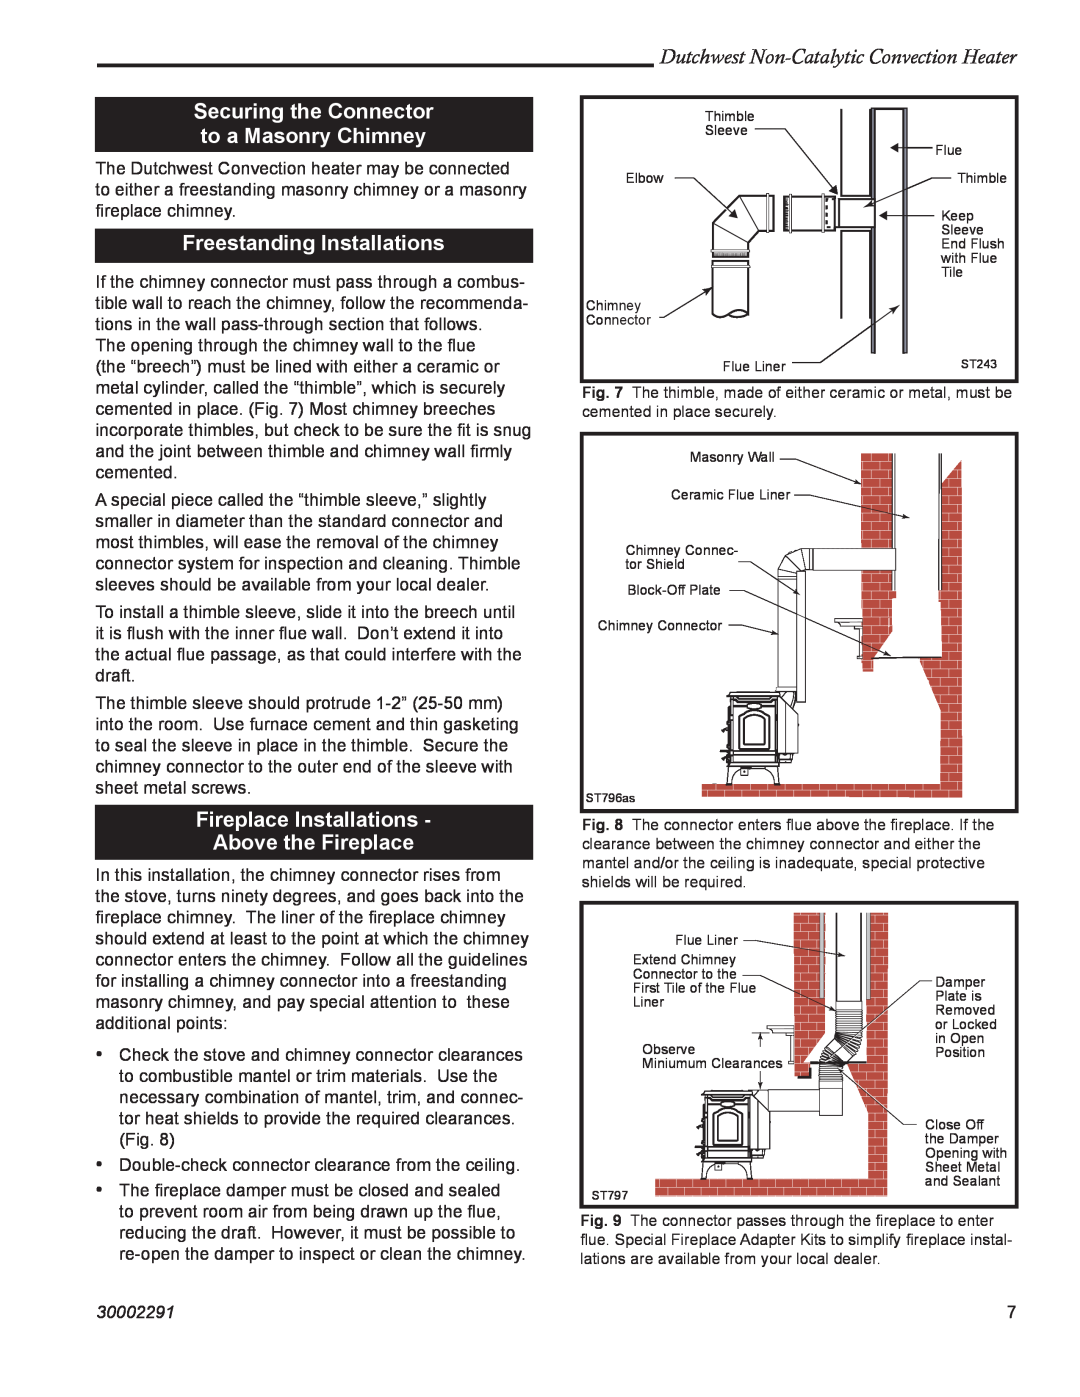 Vermont Casting 2479 manual Securing the Connector to a Masonry Chimney, Freestanding Installations, 30002291 